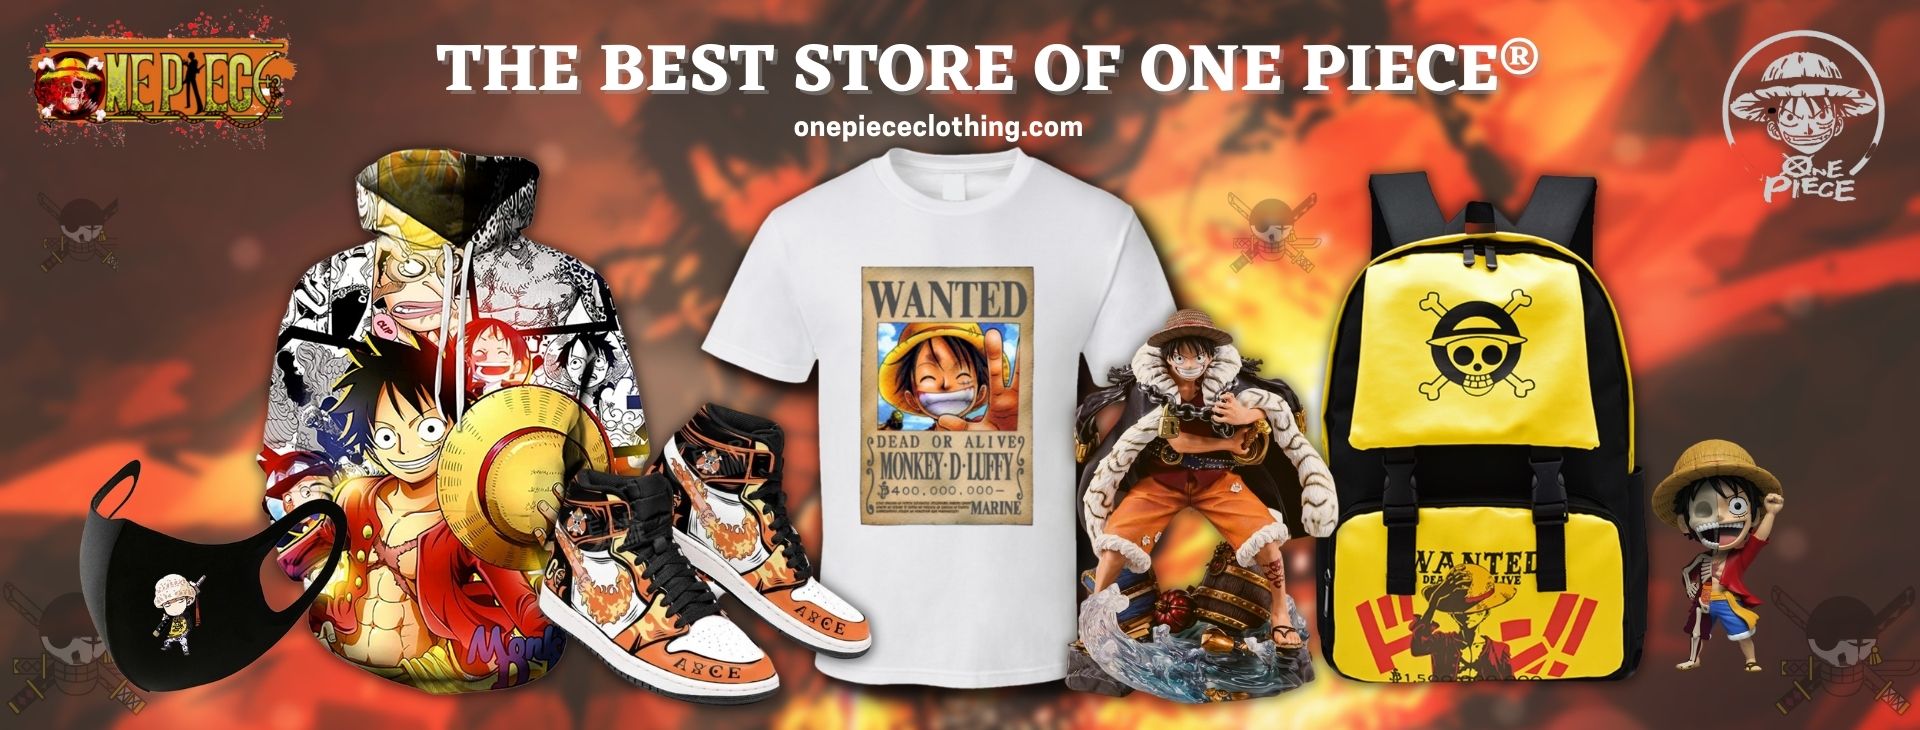 One Piece Clothing Banner - One Piece Clothing